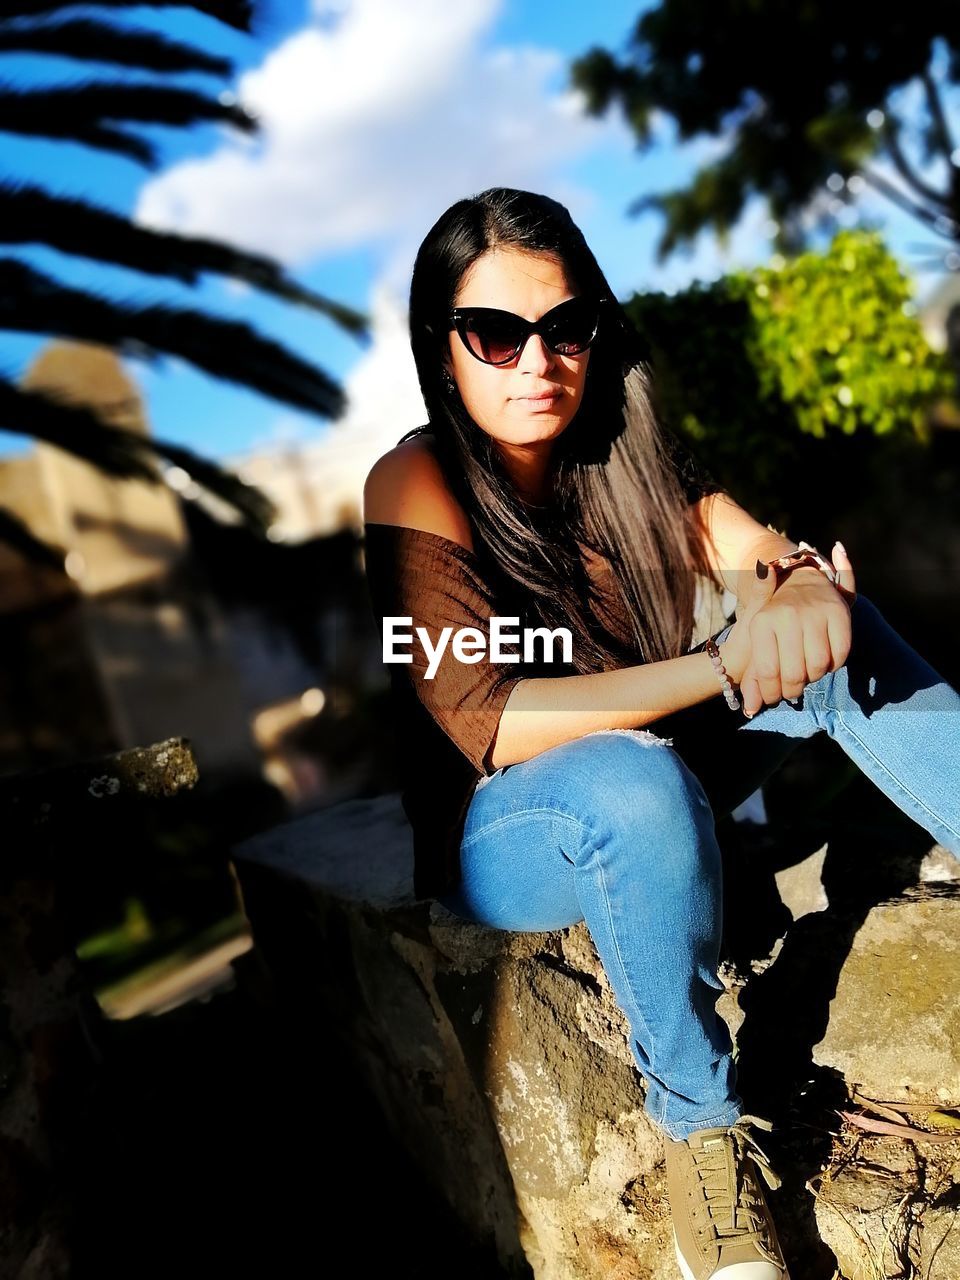 Portrait of young woman wearing sunglasses sitting while sitting outdoors